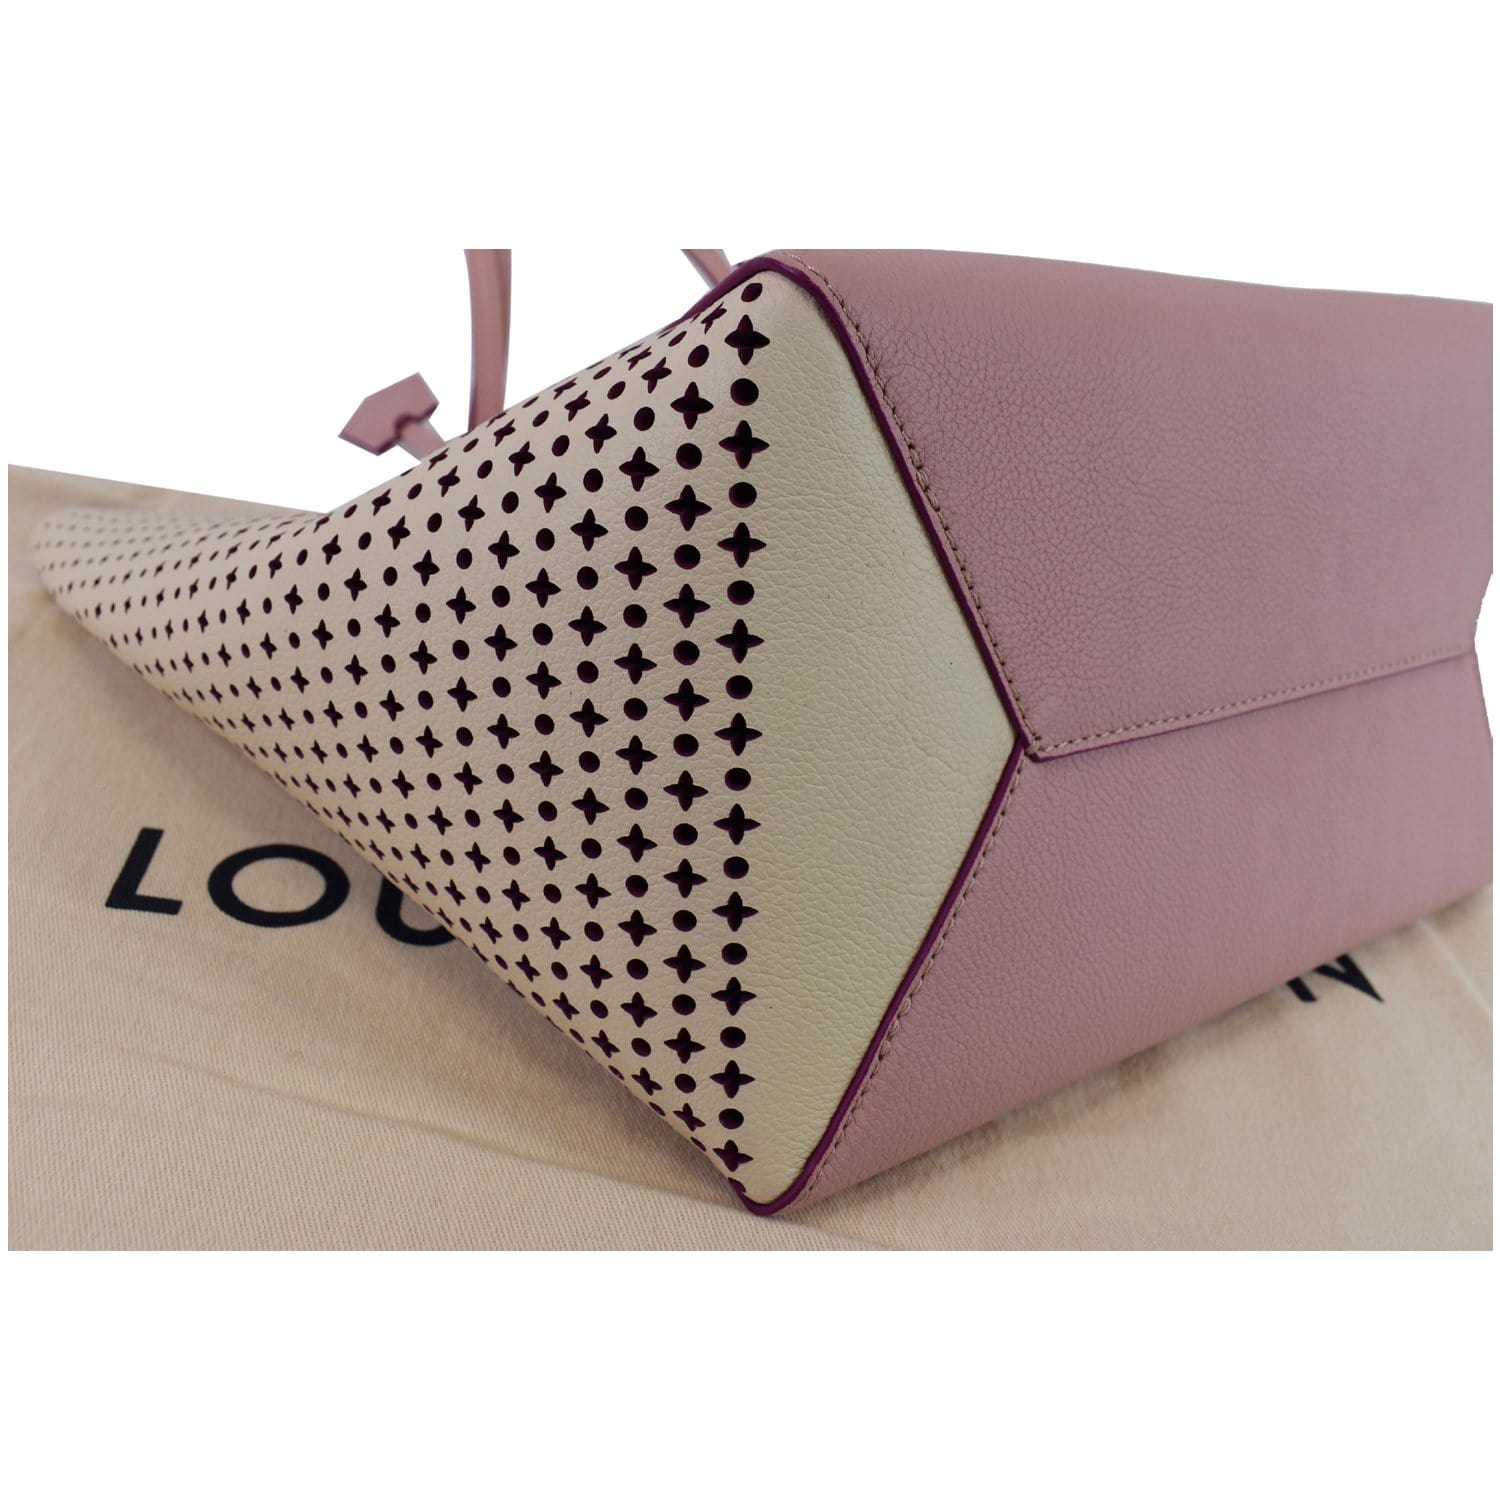 Louis Vuitton, Perforated Pink Calfskin Lockme Backpack